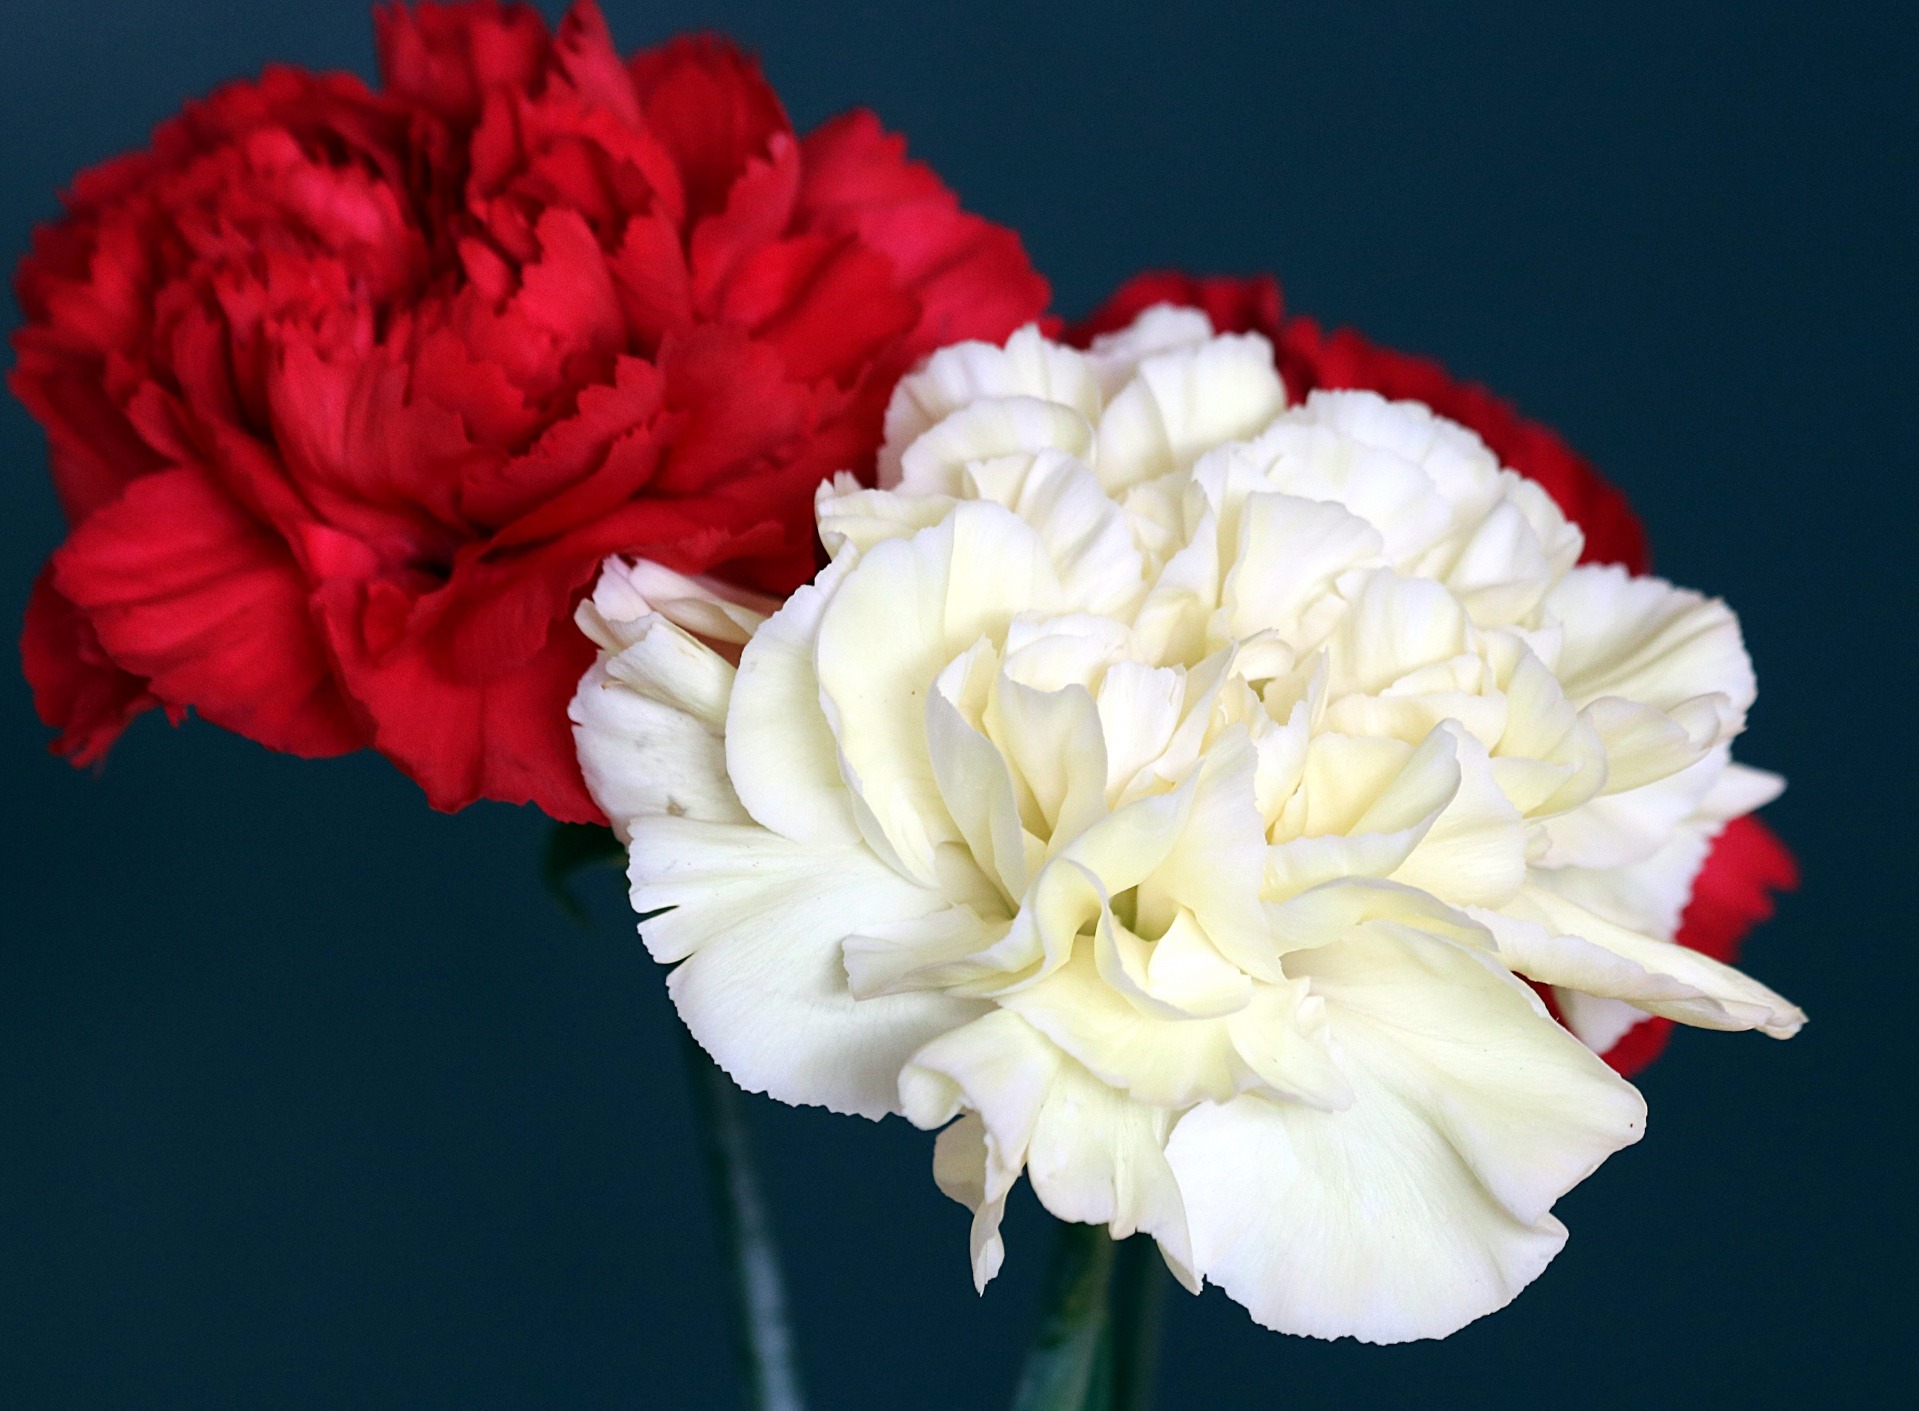 A bundle of carnation flowers in red and white